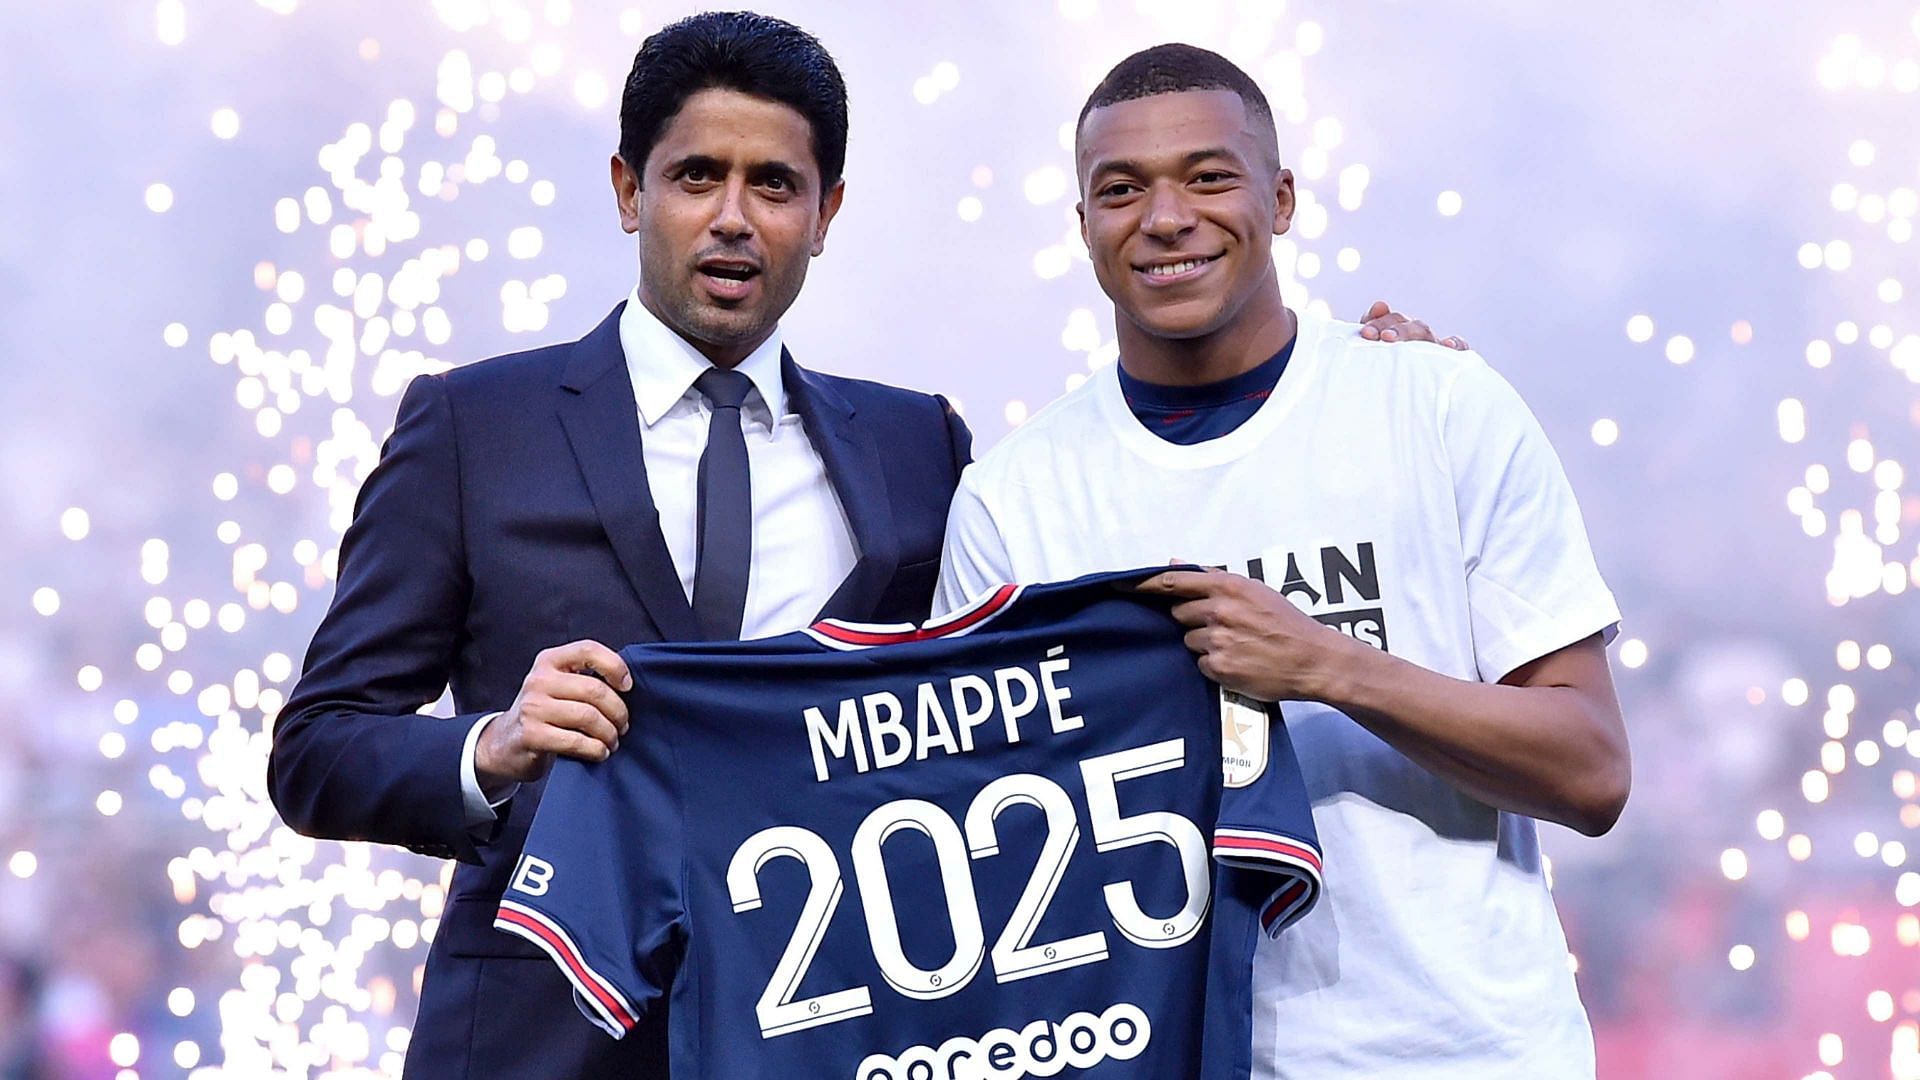 Kylian Mbappe appeared to sign a three-year deal initially (Image - GOAL).